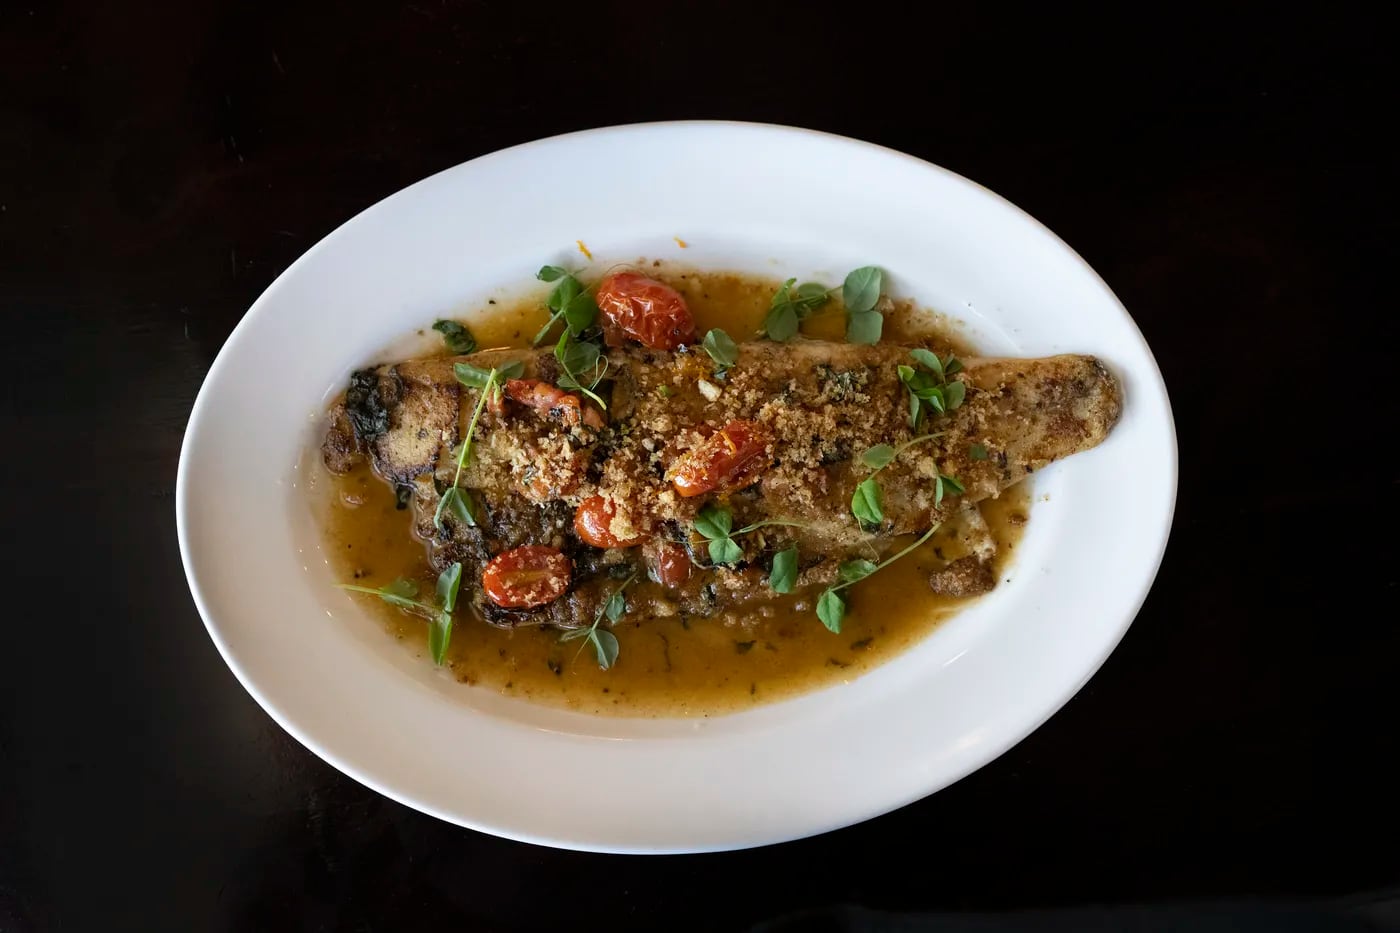 A meaty branzino fillet was topped with a brothy butter sauce of citrus and tomatoes and crunchy oreganata crumbs at Queen Bean Bistro.